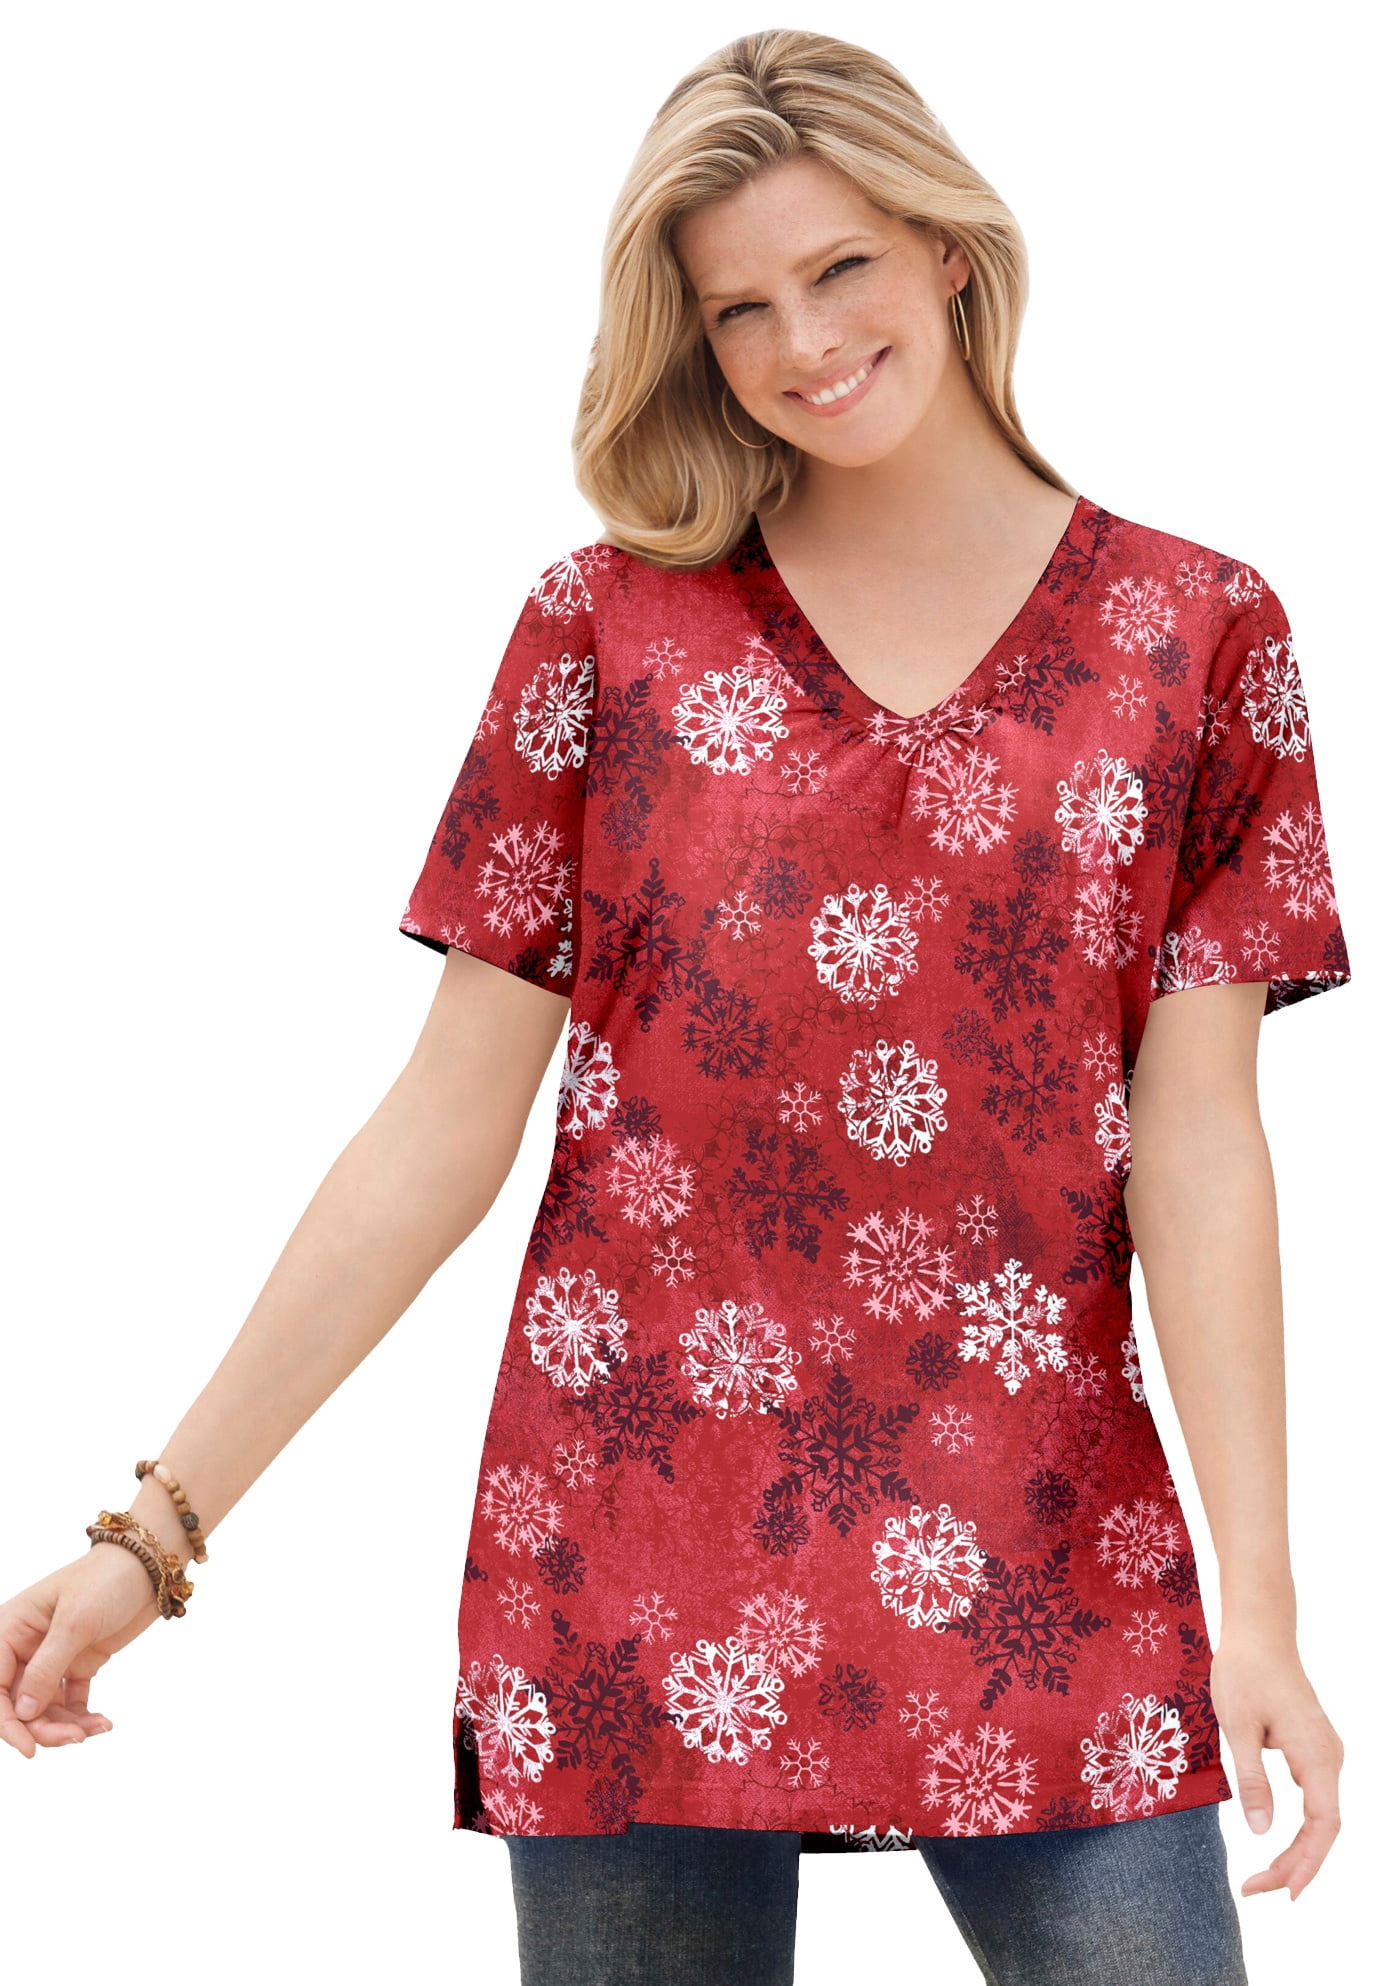 Ladies Short Sleeve Tunic - The Stitching Zone Galway